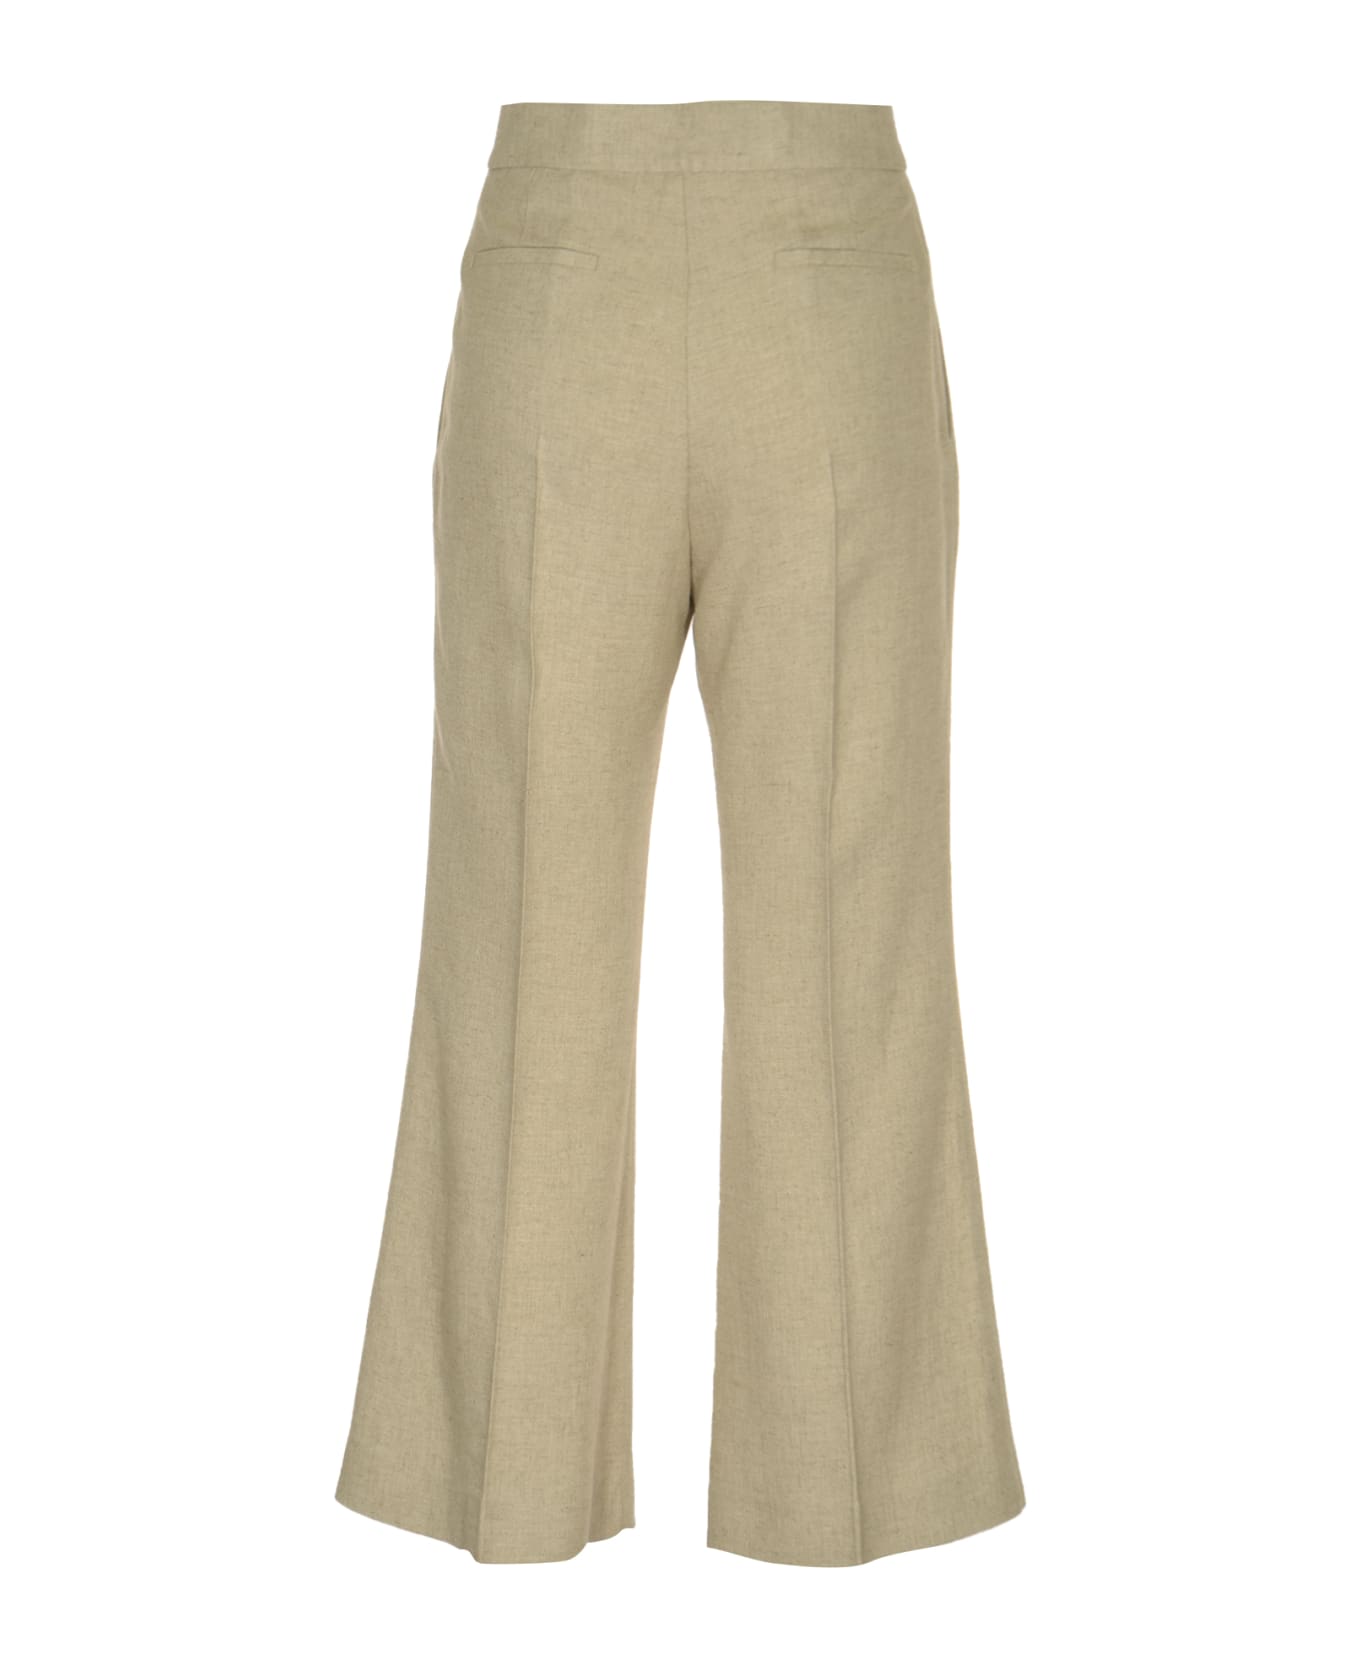 MSGM Classic Concealed Trousers - Beige ボトムス